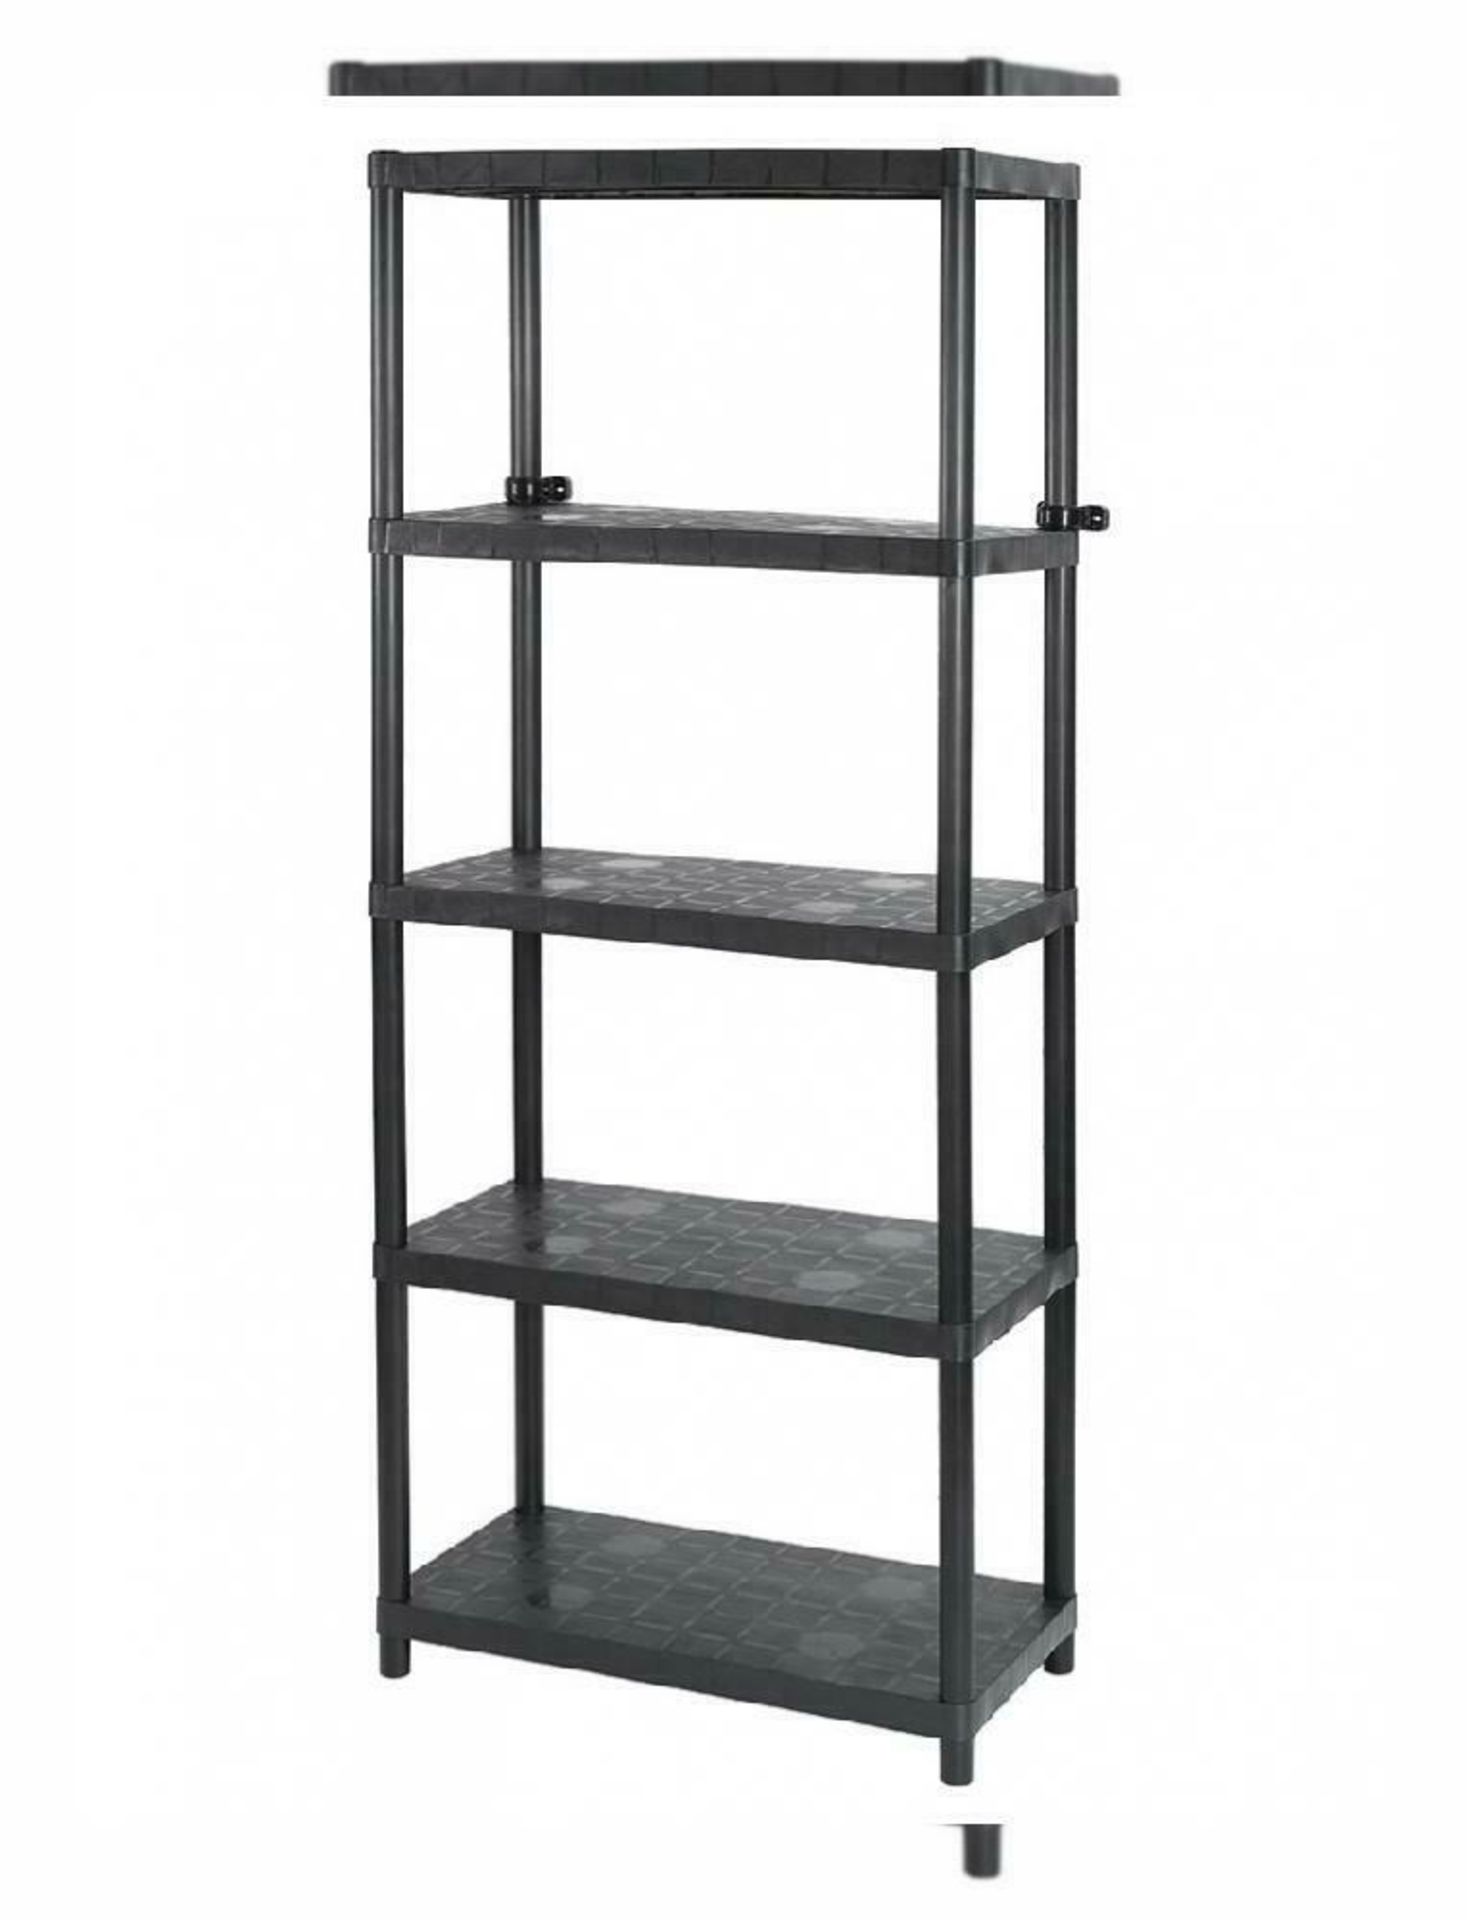 KETER SIGMA SHELVING Keter Sigma Shelving Description: After a quick and easy tool-free assembly,